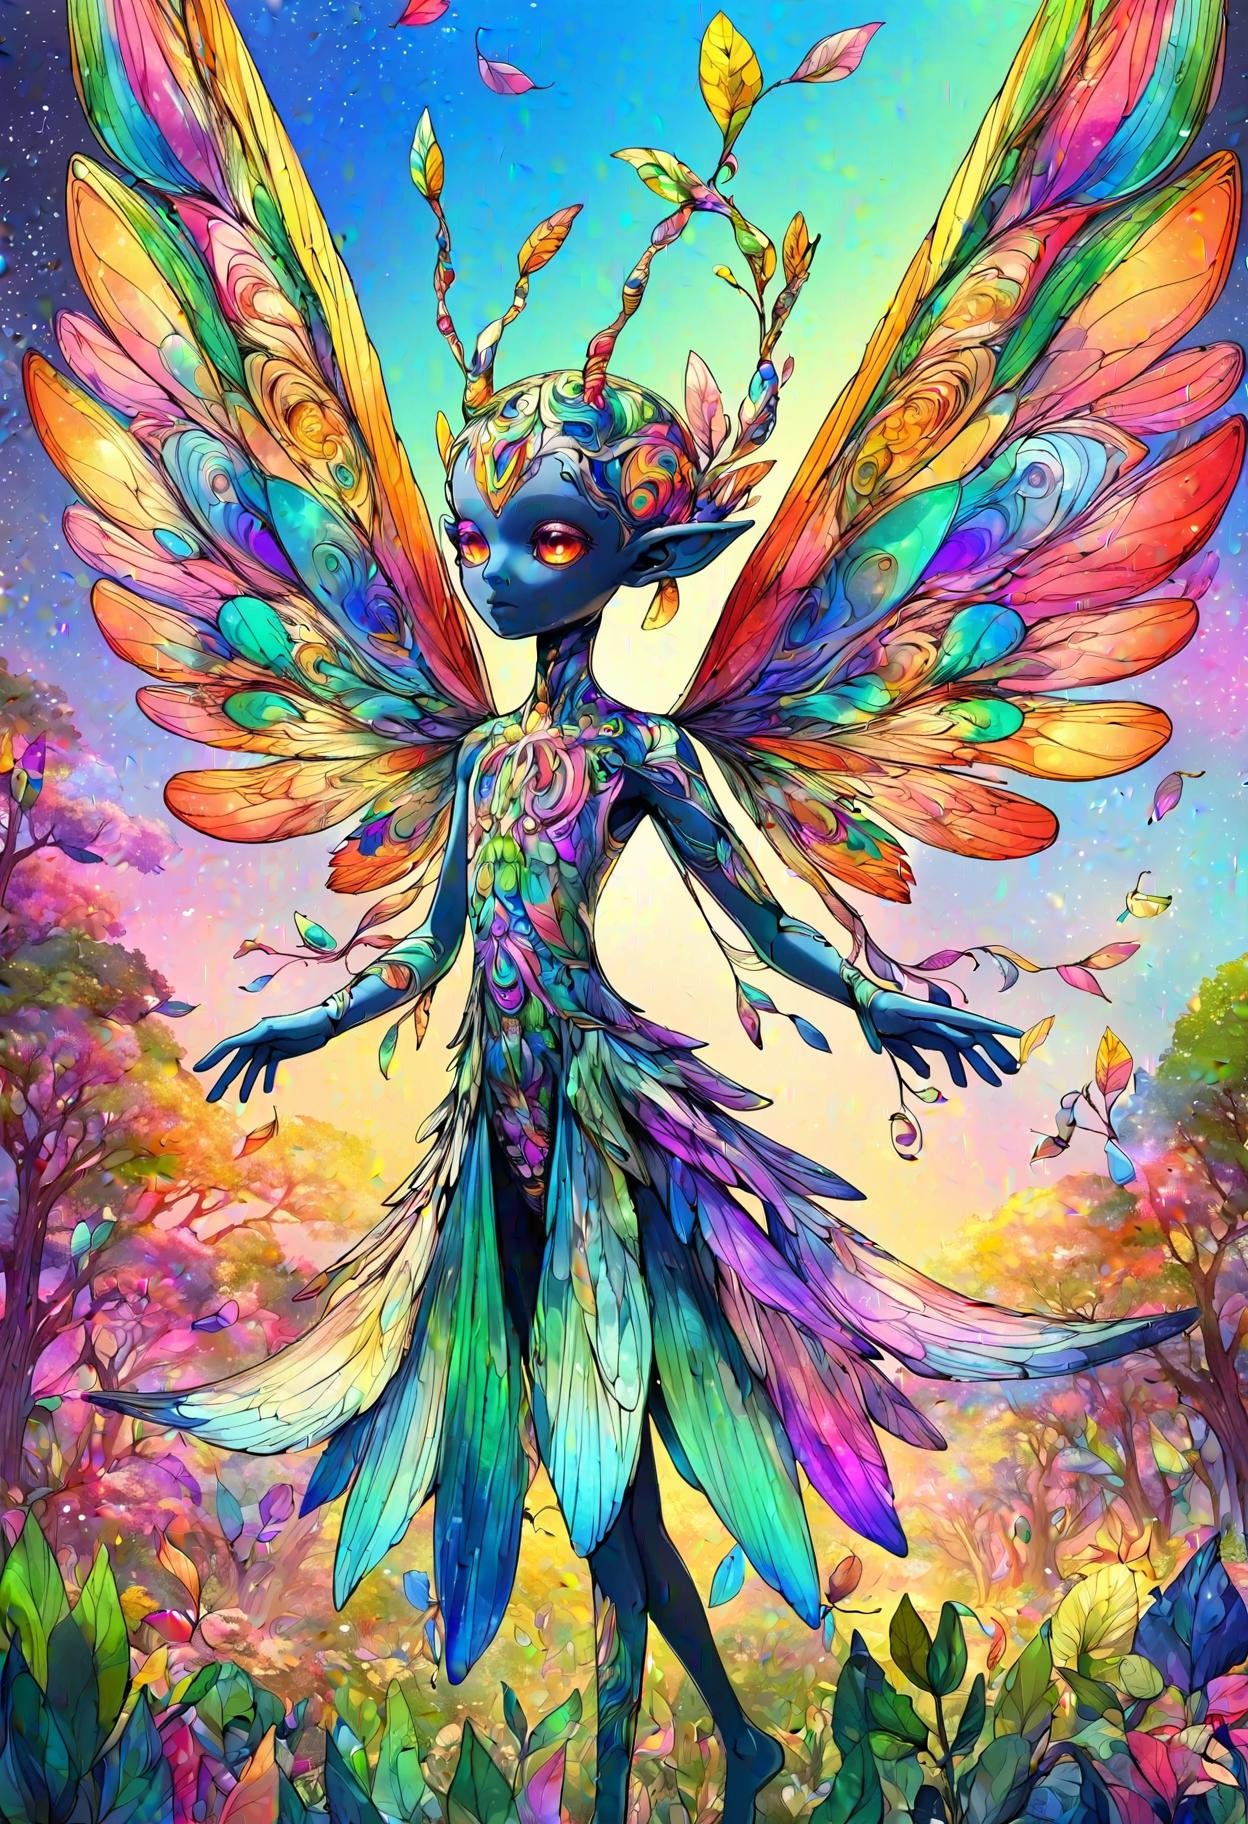 DonMM3l4nch0l1cP5ych0XL,vibrant, psychodelic, enenra, tiny humanoid creature with wings, delicate graceful appearance, transparent opalescent iridescent wings, pointed ears, colorful ethereal clothing, nature inspired attire, made of petals and leaves, __Bo/clothings/magical/unisex/accessories__, playful ,  <lora:DonMM3l4nch0l1cP5ych0XL-000004:0.8>